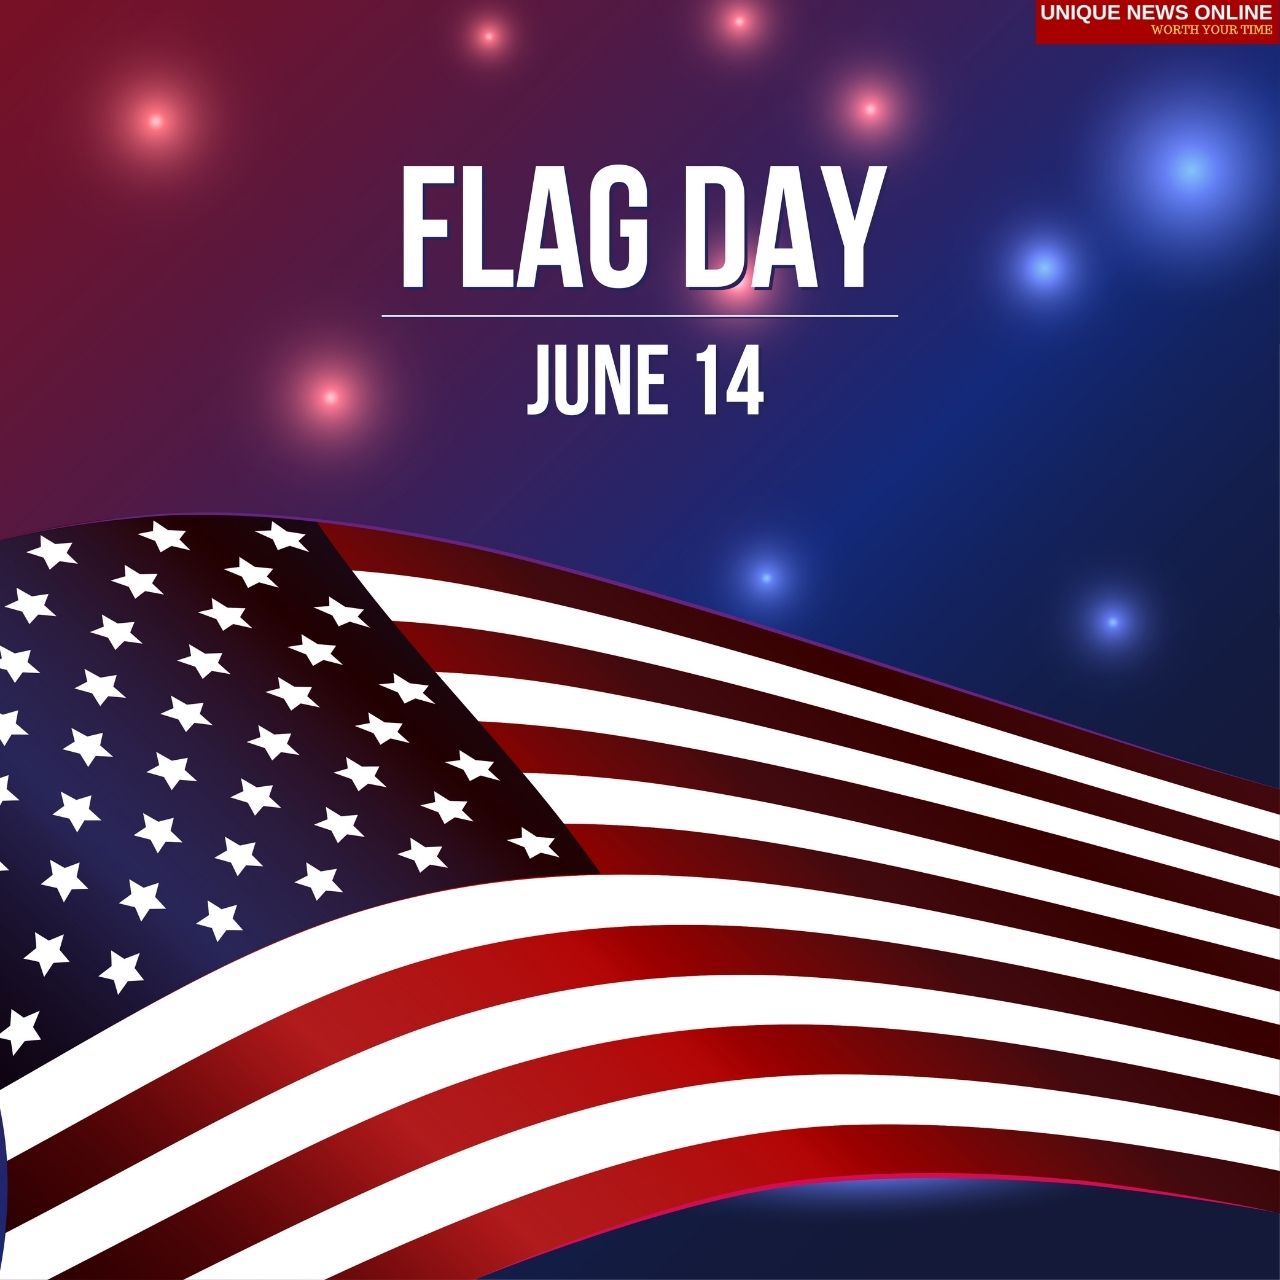 Flag Day (United States) 2021 Quotes, Wishes, Images, Messages, and Greetings to Share